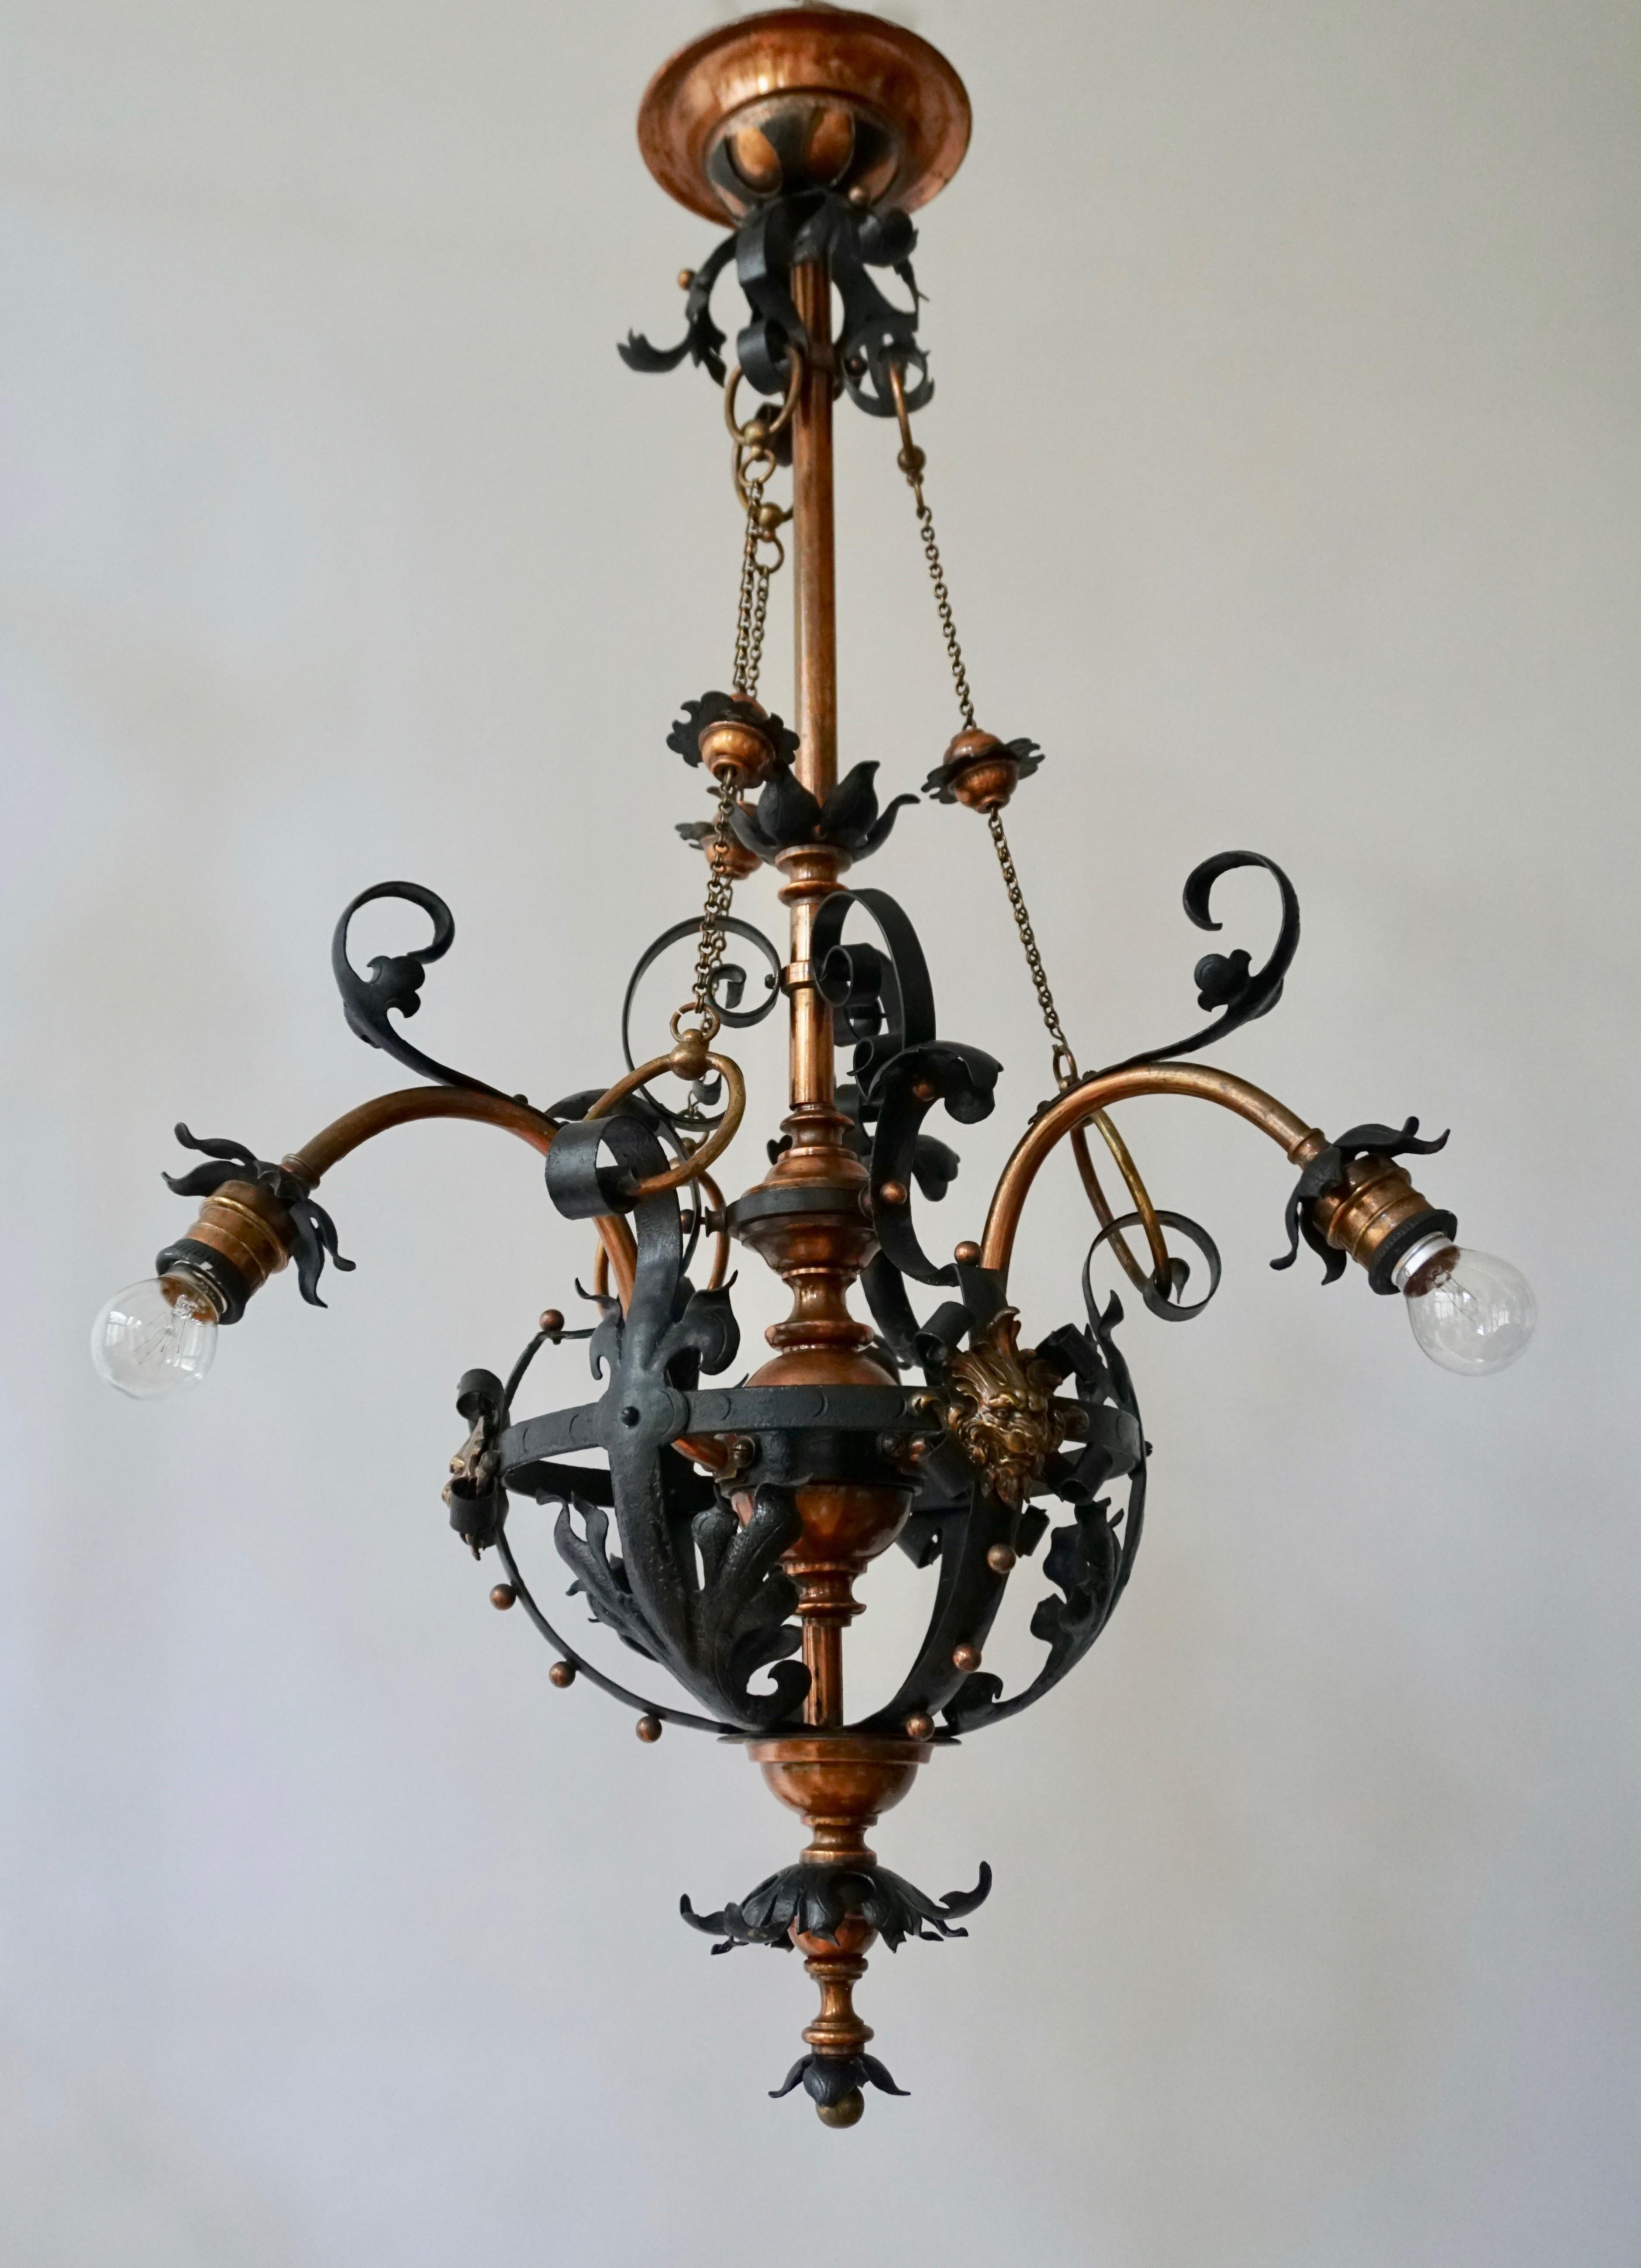 Rare Arts & Crafts wrought iron and copper chandelier with beautiful bronze lion heads.

This large and all-handcrafted chandelier is another one of our recent great finds. The beautiful shape and the many details make this one of a kind